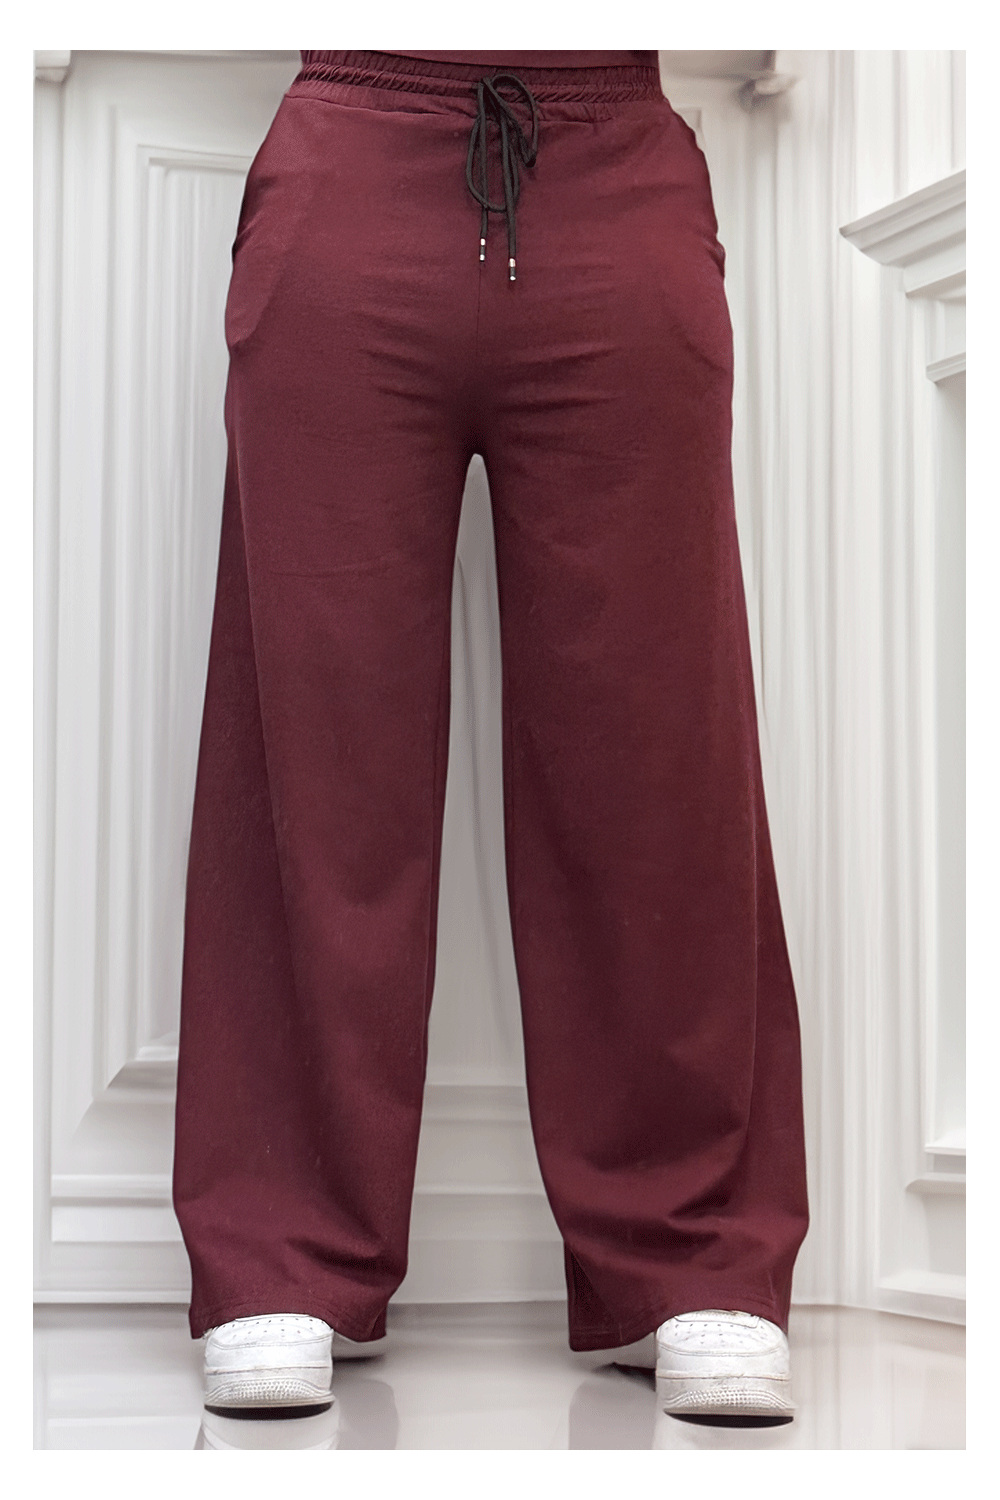 Burgundy palazzo pants with cotton pockets